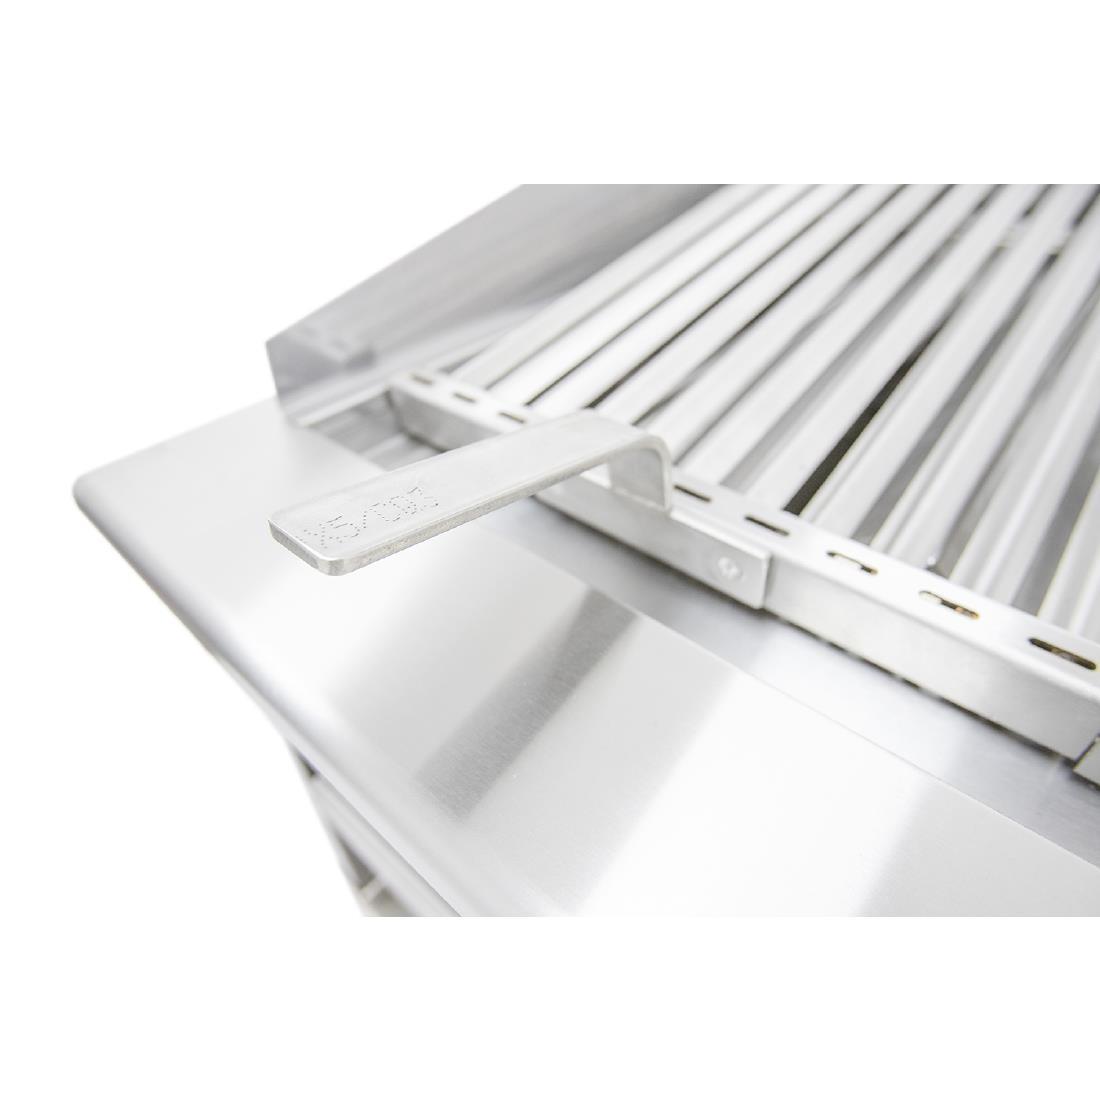 Parry Lava Free Heavy Duty Chargrill UGC8 - GM764  - 4